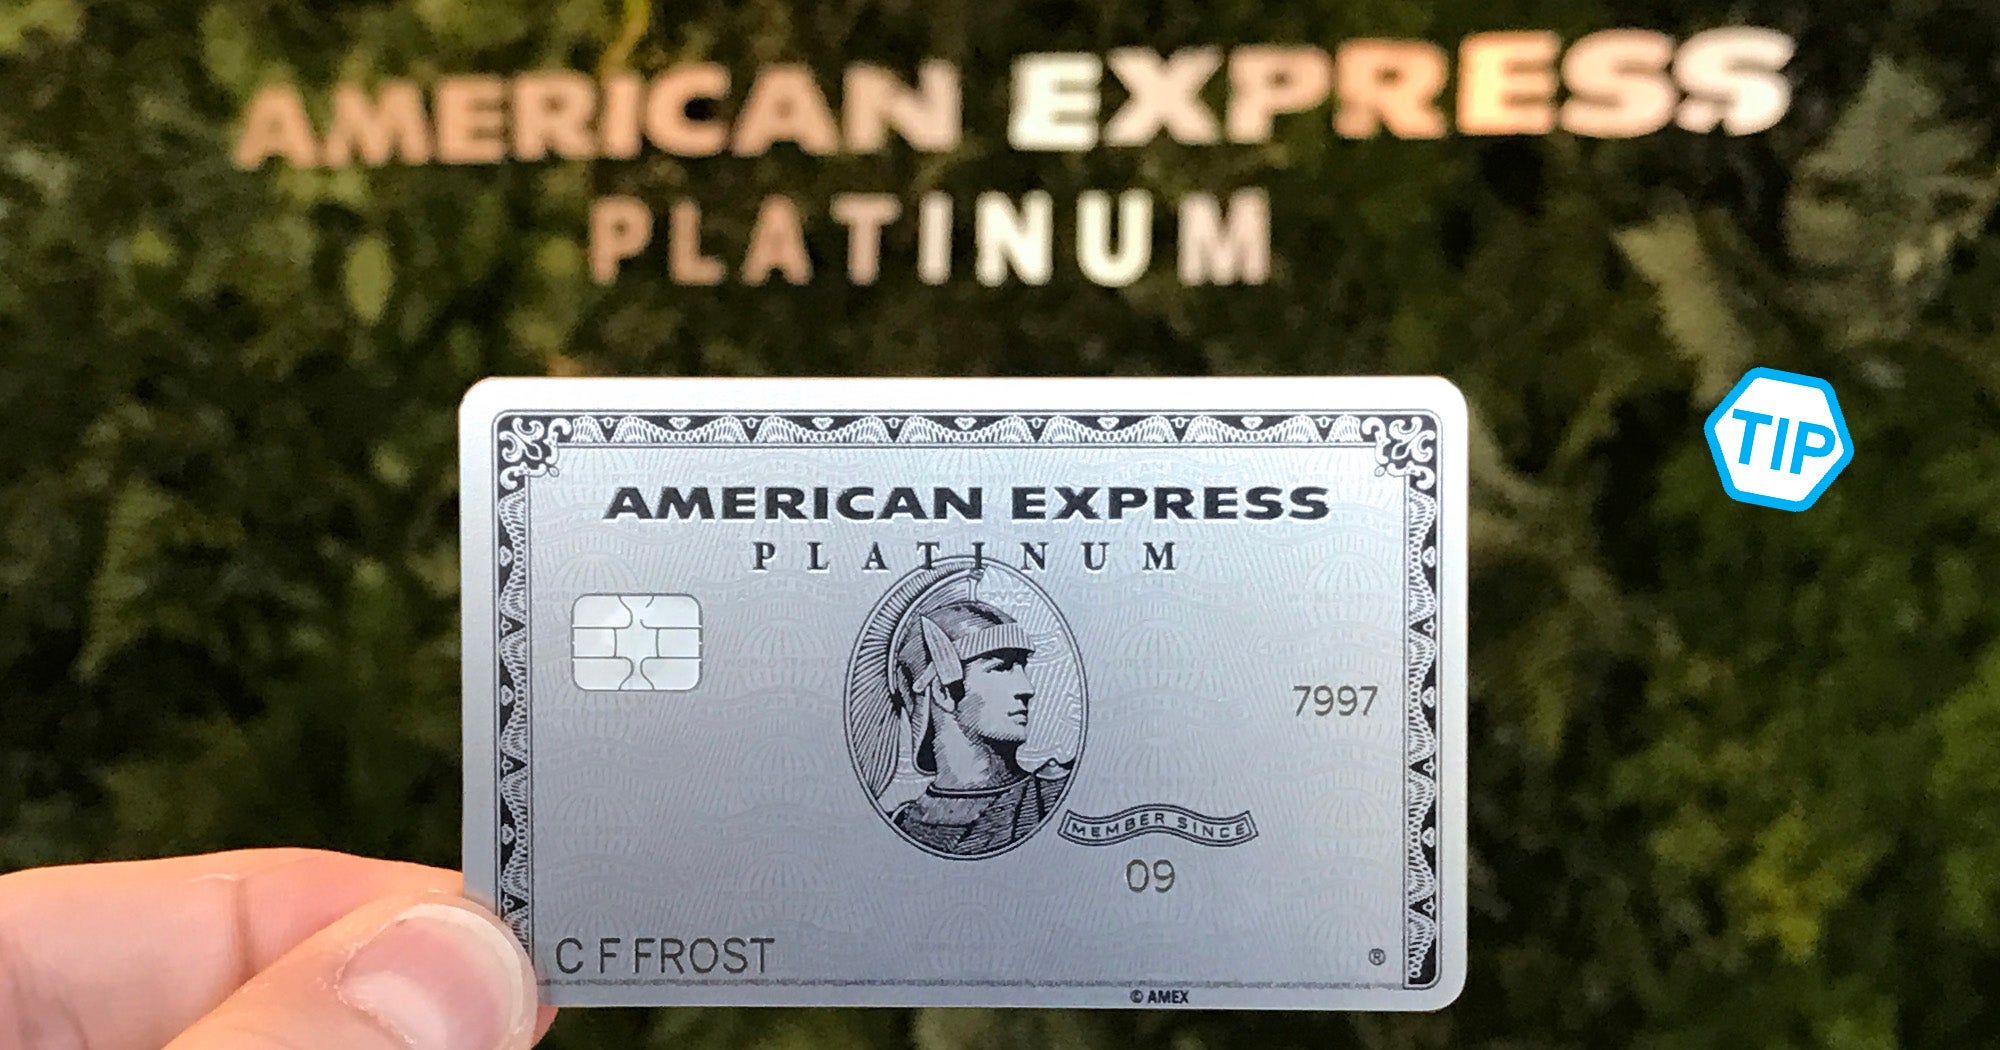 How to Use Amex Airline Fee Credit on an Airline Gift Card